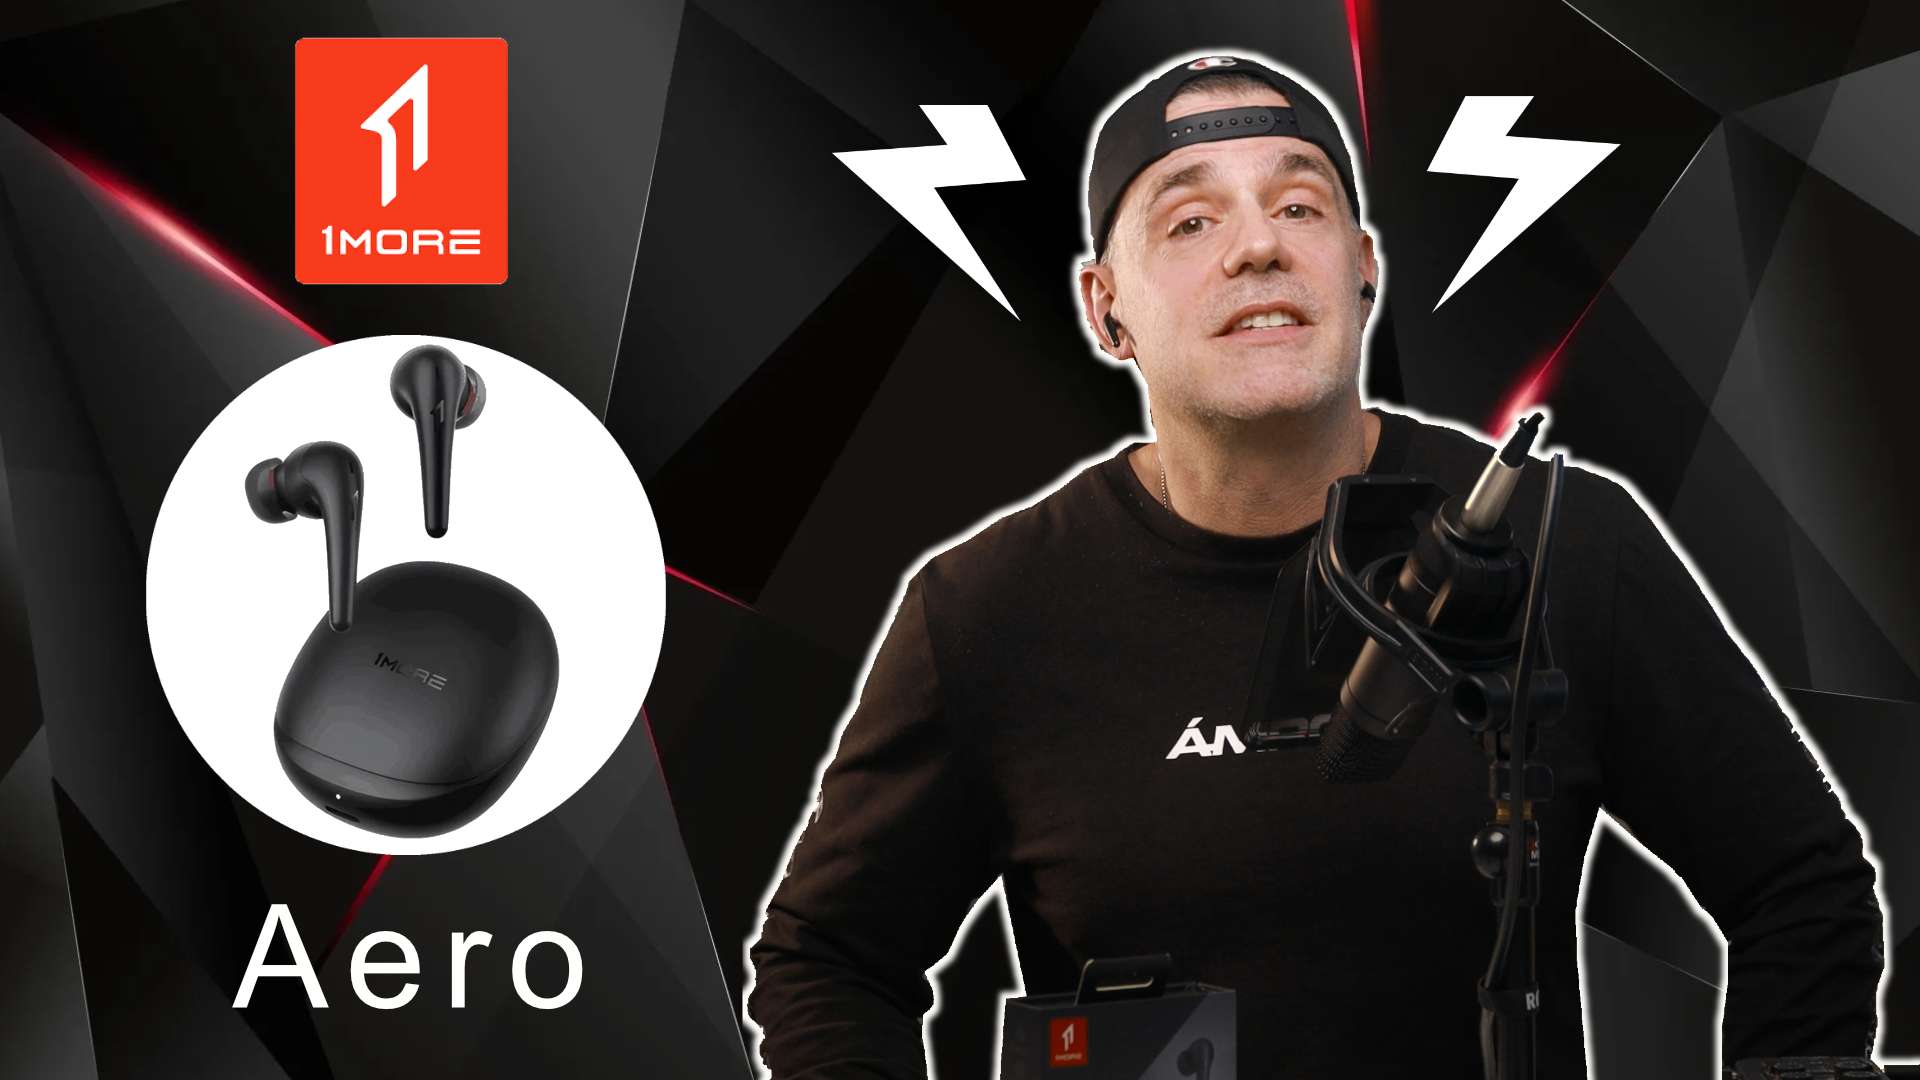 You are currently viewing 1More Aero the Best Earbuds under $100